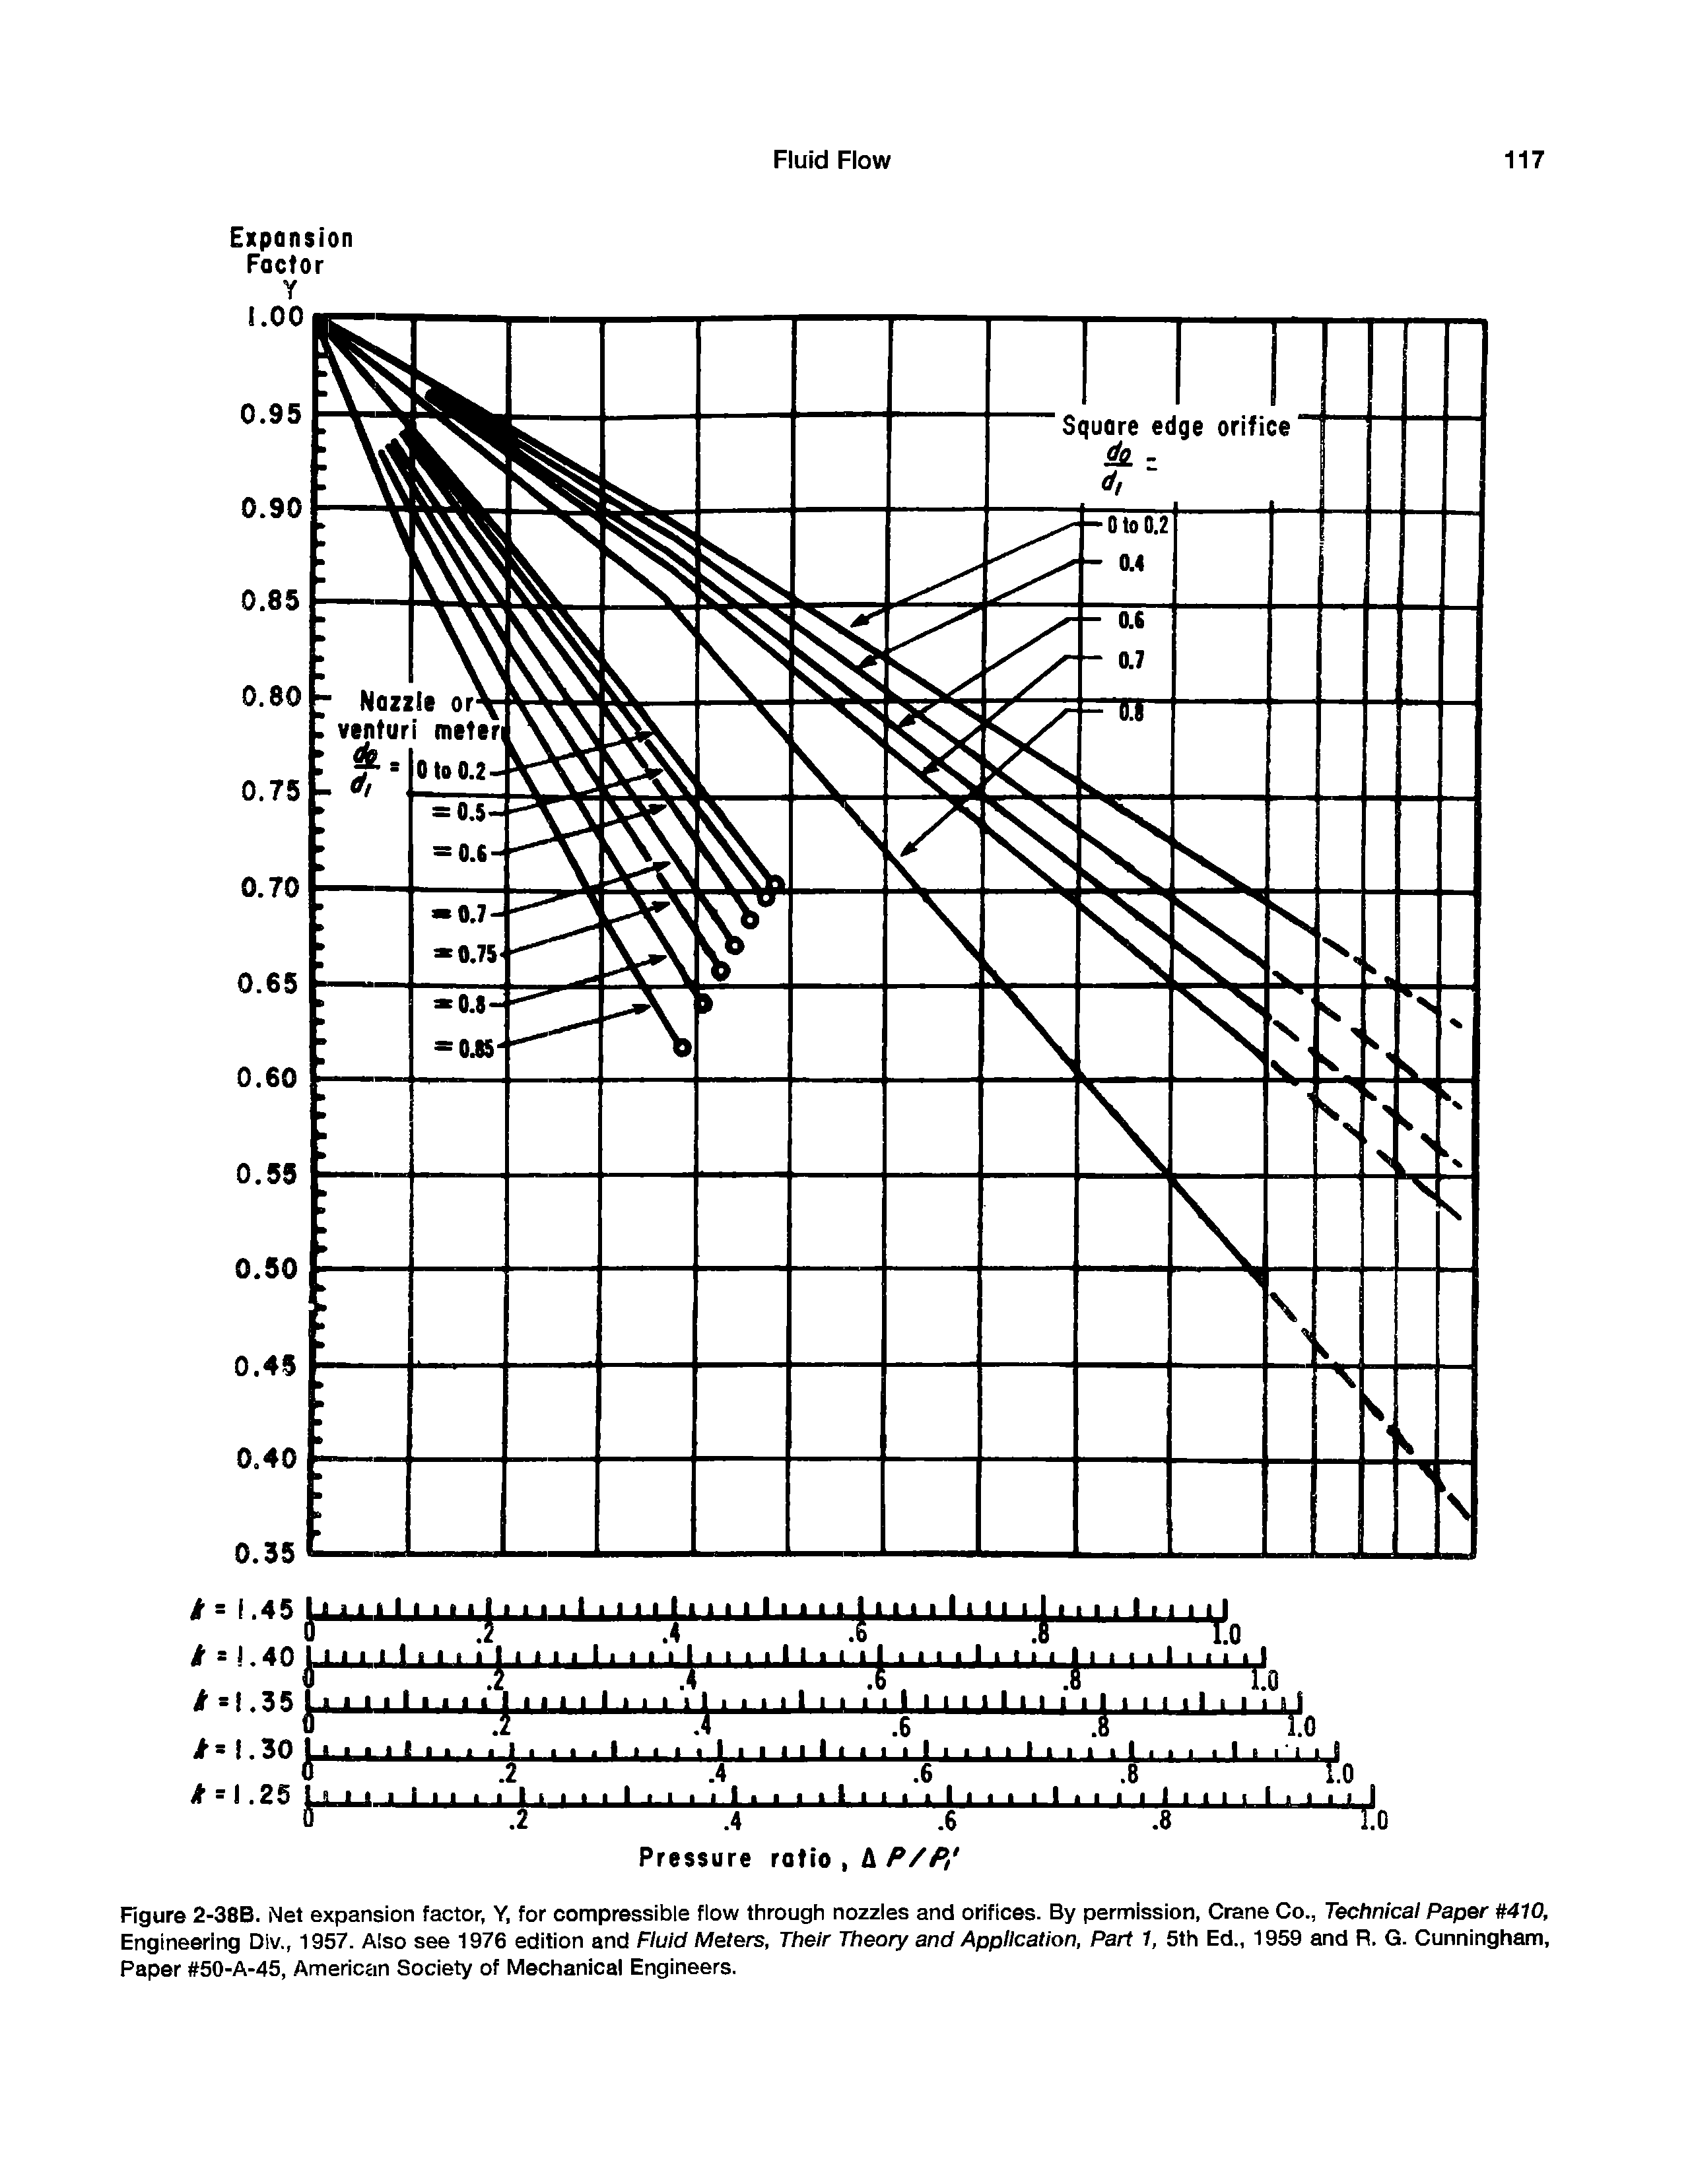 Figure 2-38B. Net expansion factor, Y, for compressible flow through nozzles and orifices. By permission, Crane Co., Technical Paper 410, Engineering Div., 1957. Also see 1976 edition and Fluid Meiers, Their Theory and Application, Part 1, 5th Ed., 1959 and R. G. Cunningham, Paper 50-A-45, American Society of Mechanical Engineers.